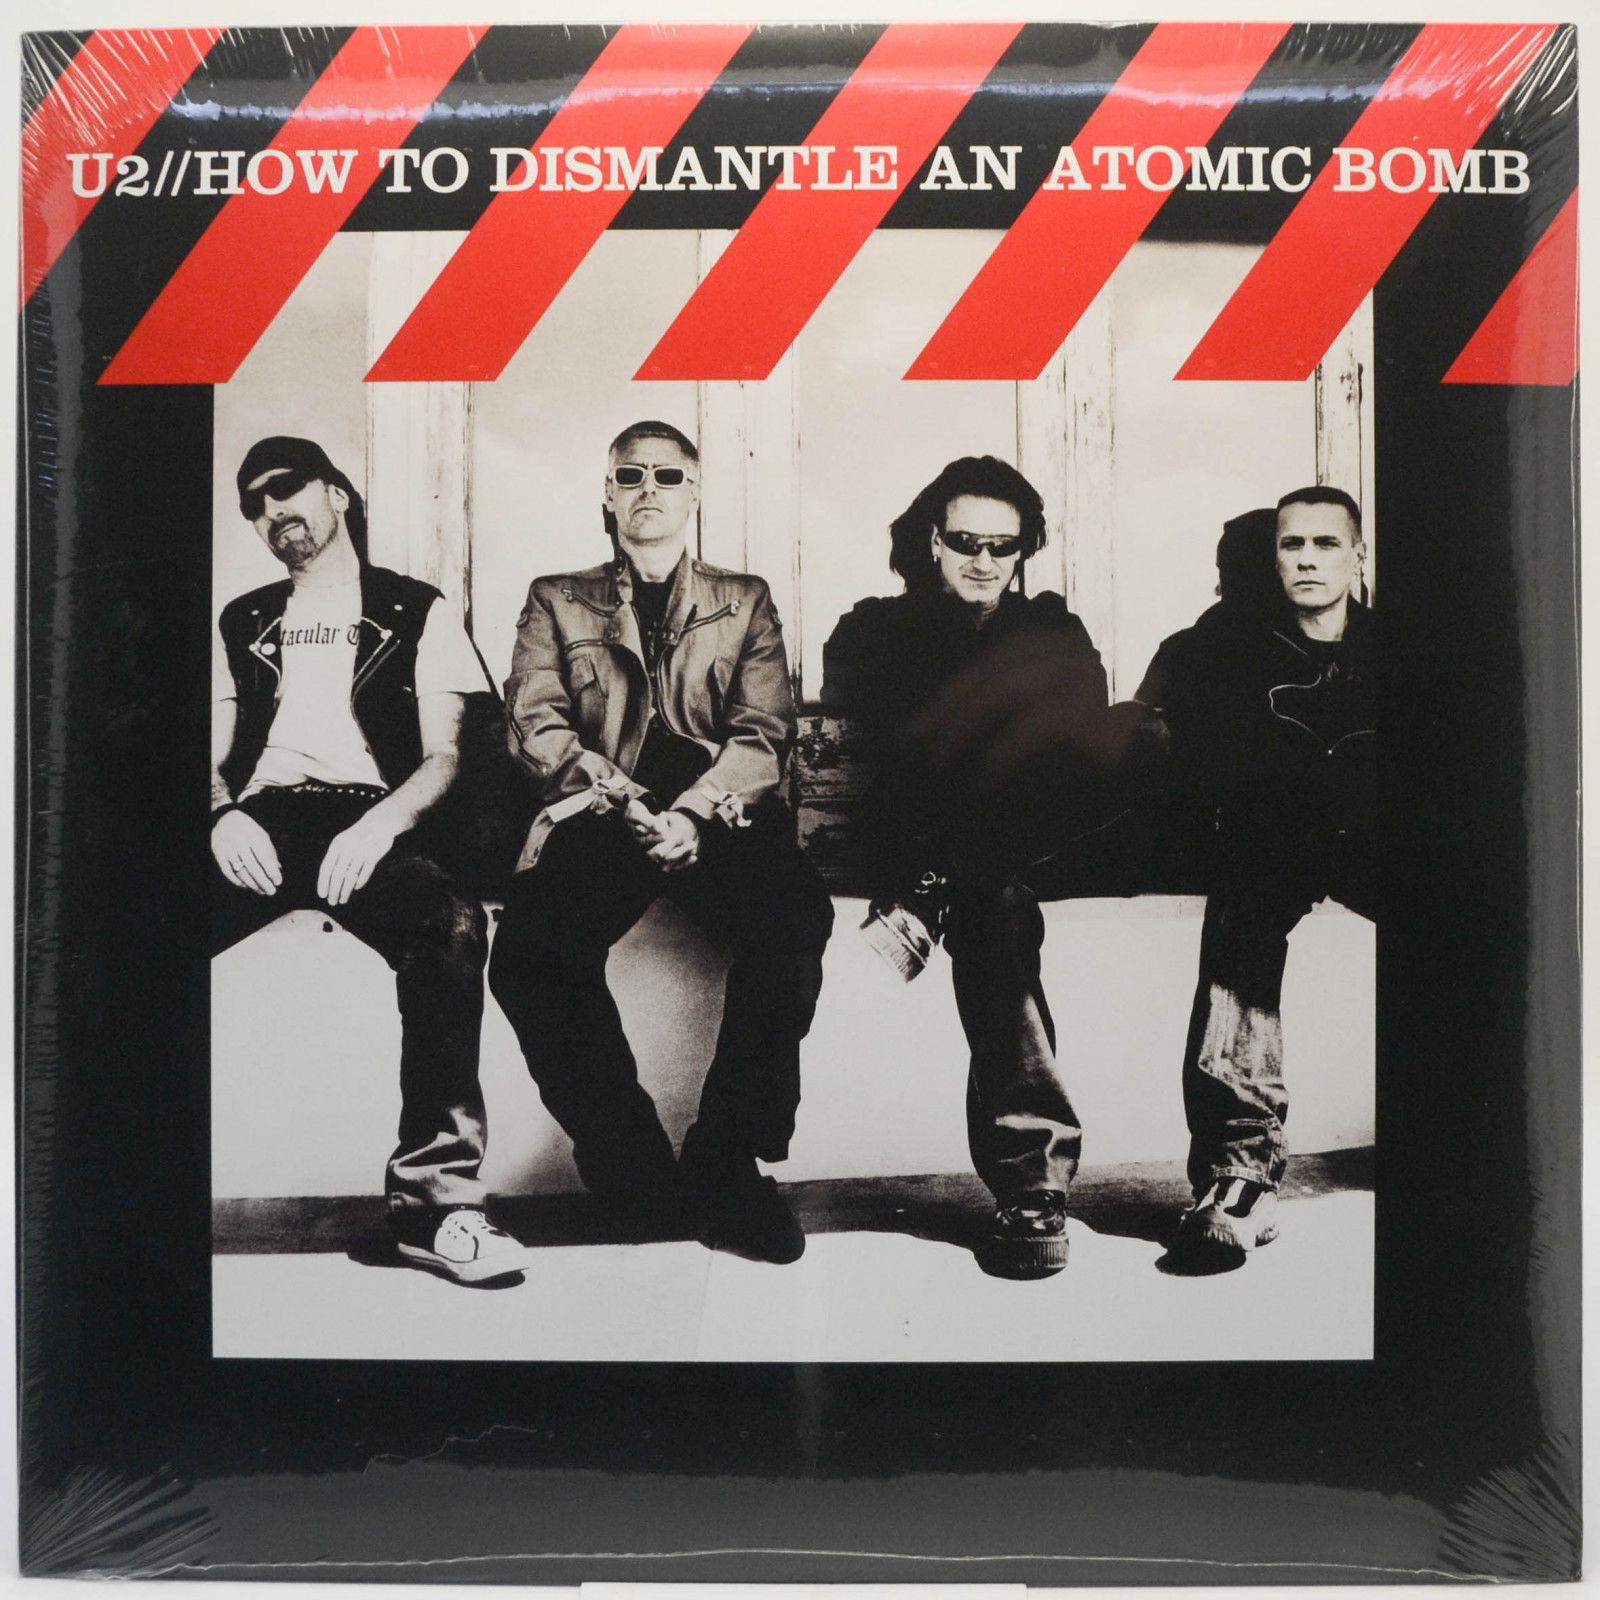 U2 — How To Dismantle An Atomic Bomb, 2004